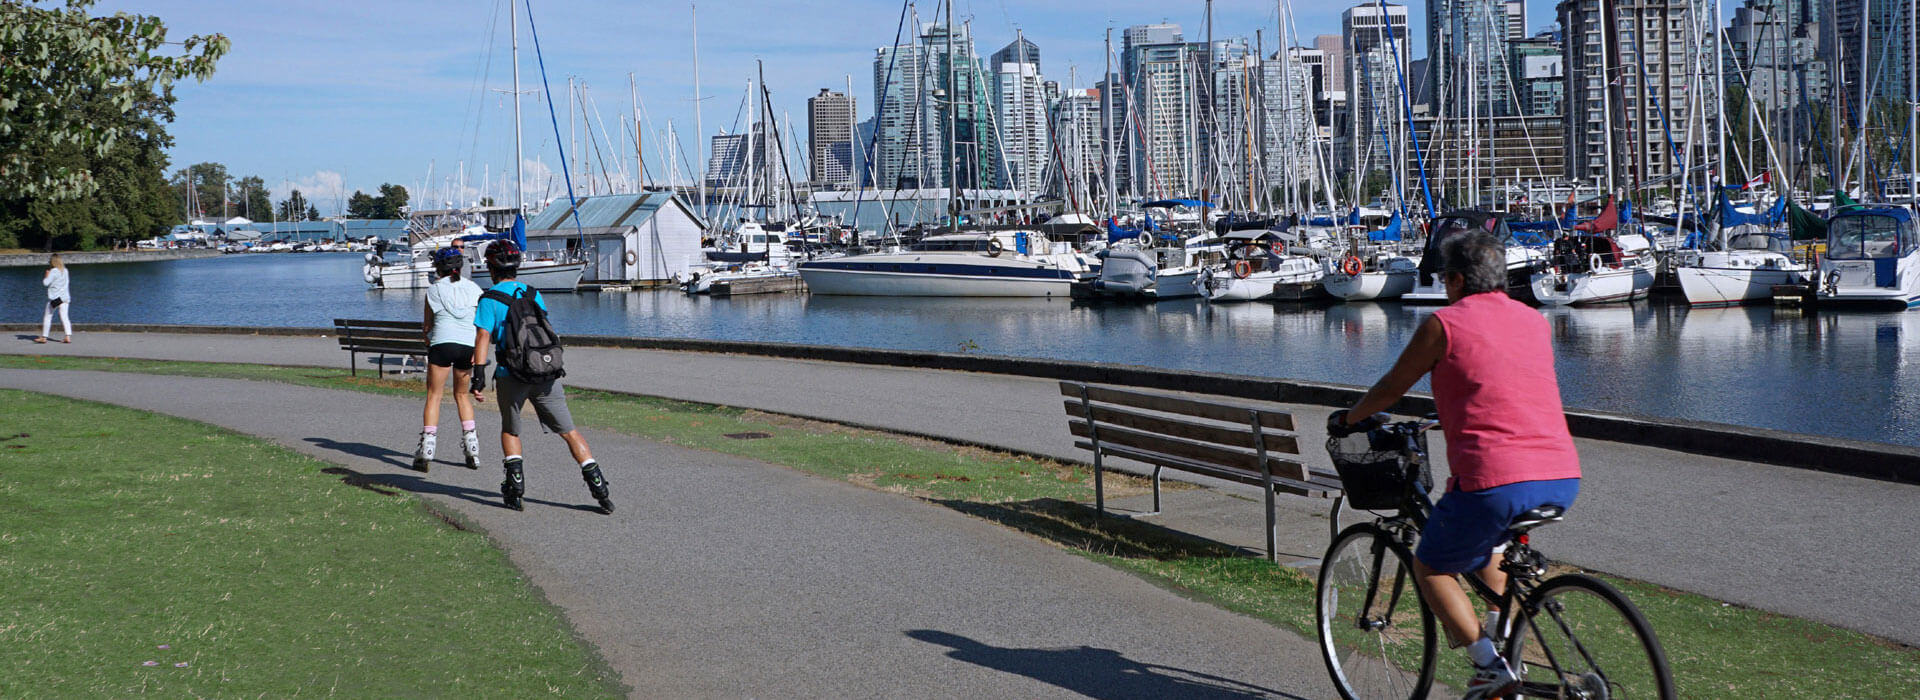 People biking and skating along a path by the shoreline with boats and yachts